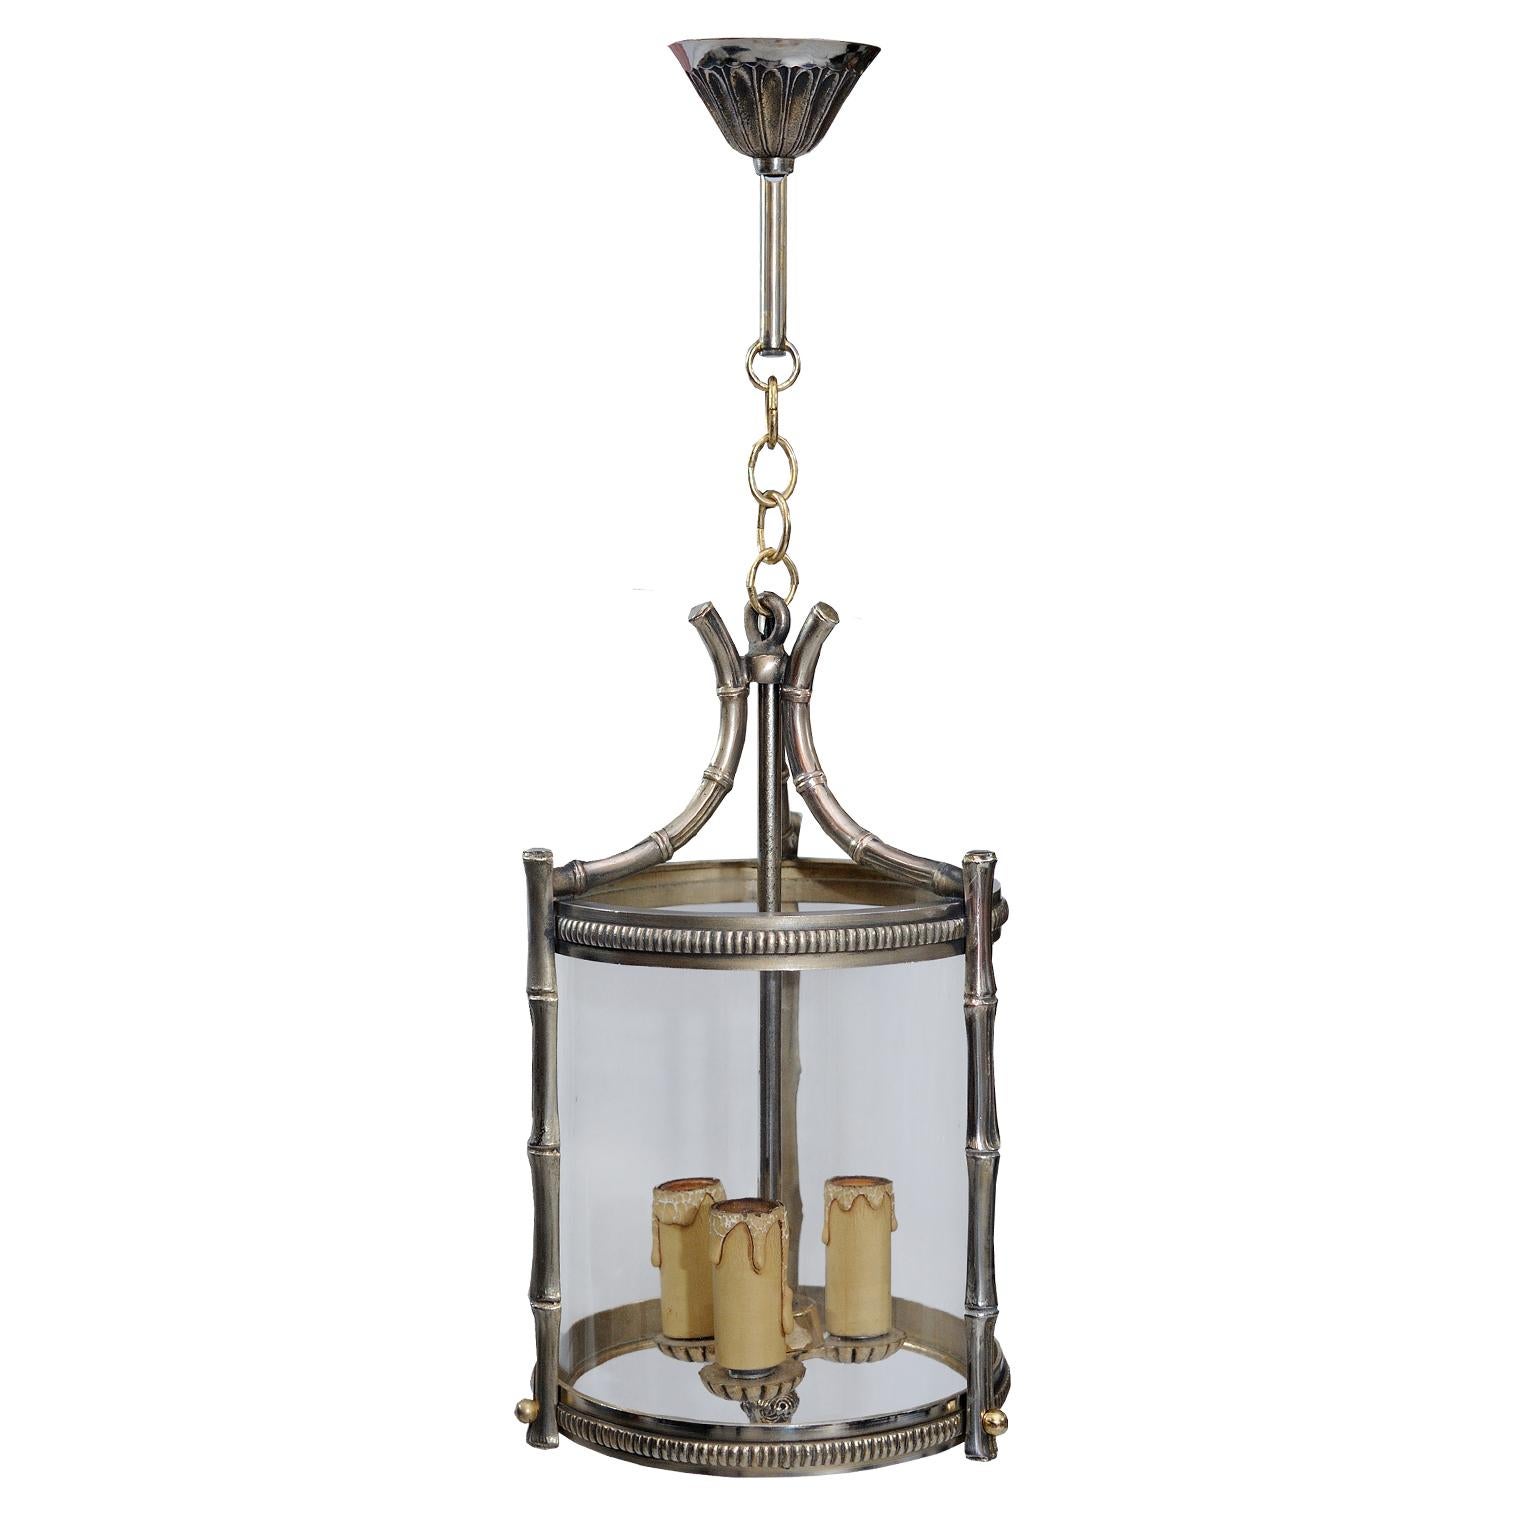 This is a very striking and really rather beautiful pair of small French clear glass, silvered faux bamboo hanging lanterns, circa 1890.

Full measurements:
Height: 35cm (13.5